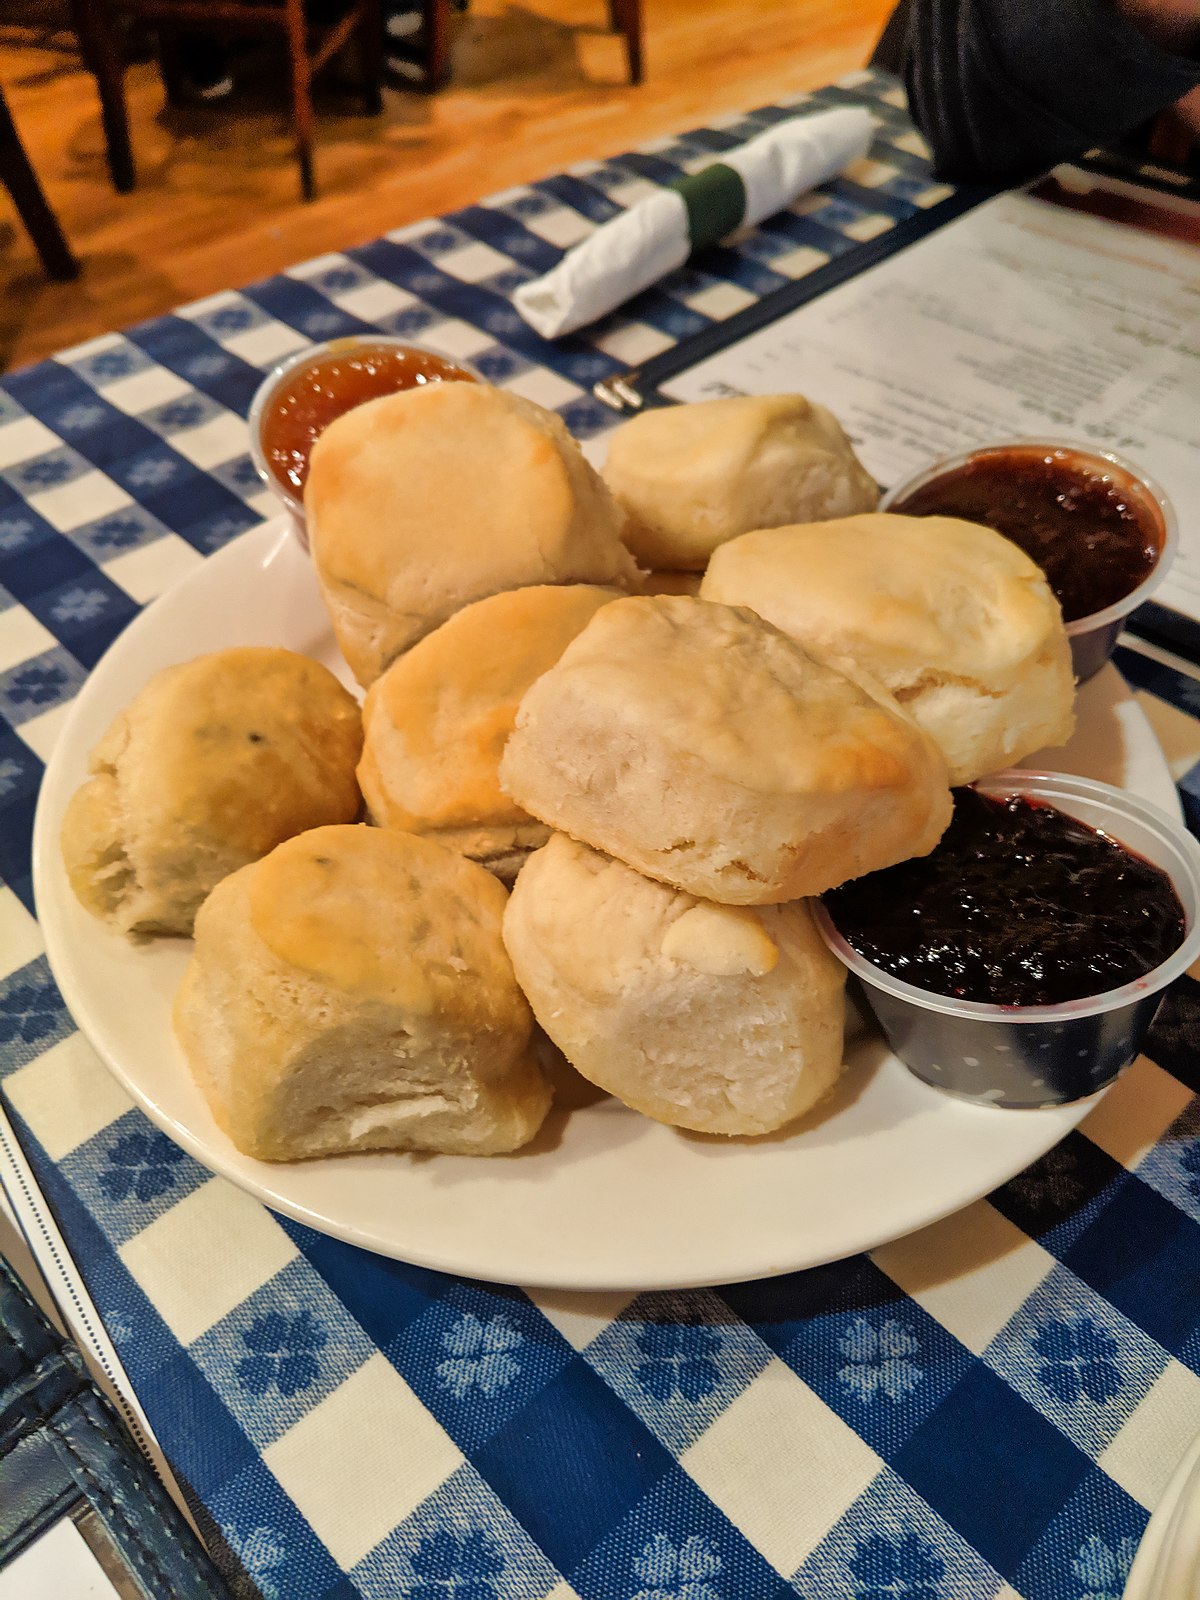 https://upload.wikimedia.org/wikipedia/commons/thumb/b/be/Loveless_Cafe_Biscuits.jpg/1200px-Loveless_Cafe_Biscuits.jpg